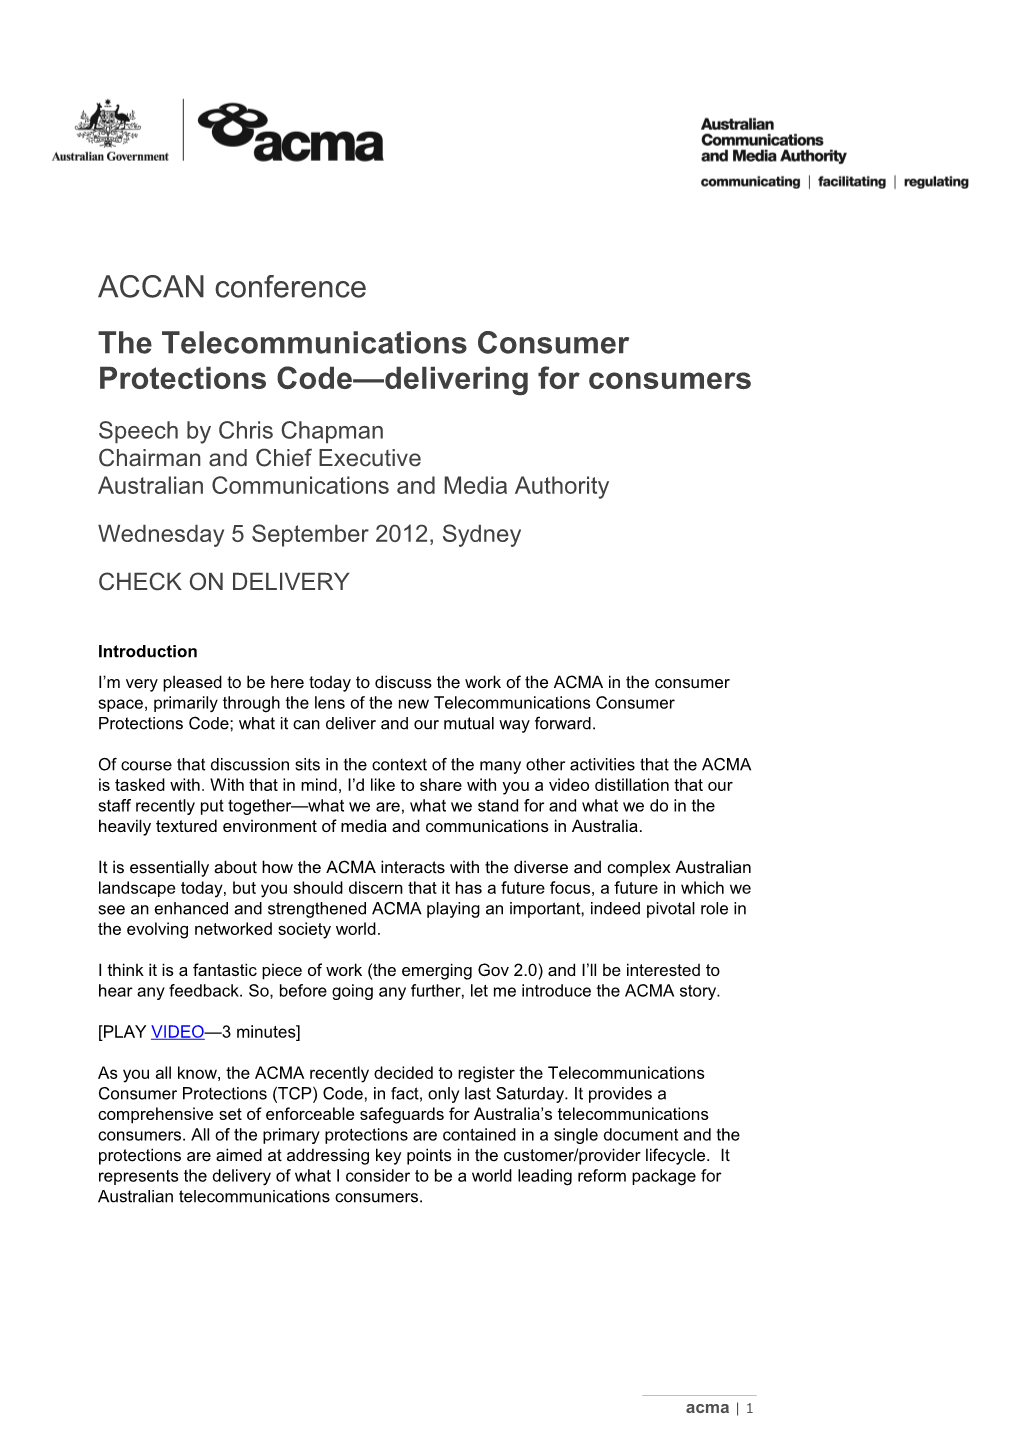 The Telecommunications Consumer Protections Code Delivering for Consumers - C Chapman ACCAN